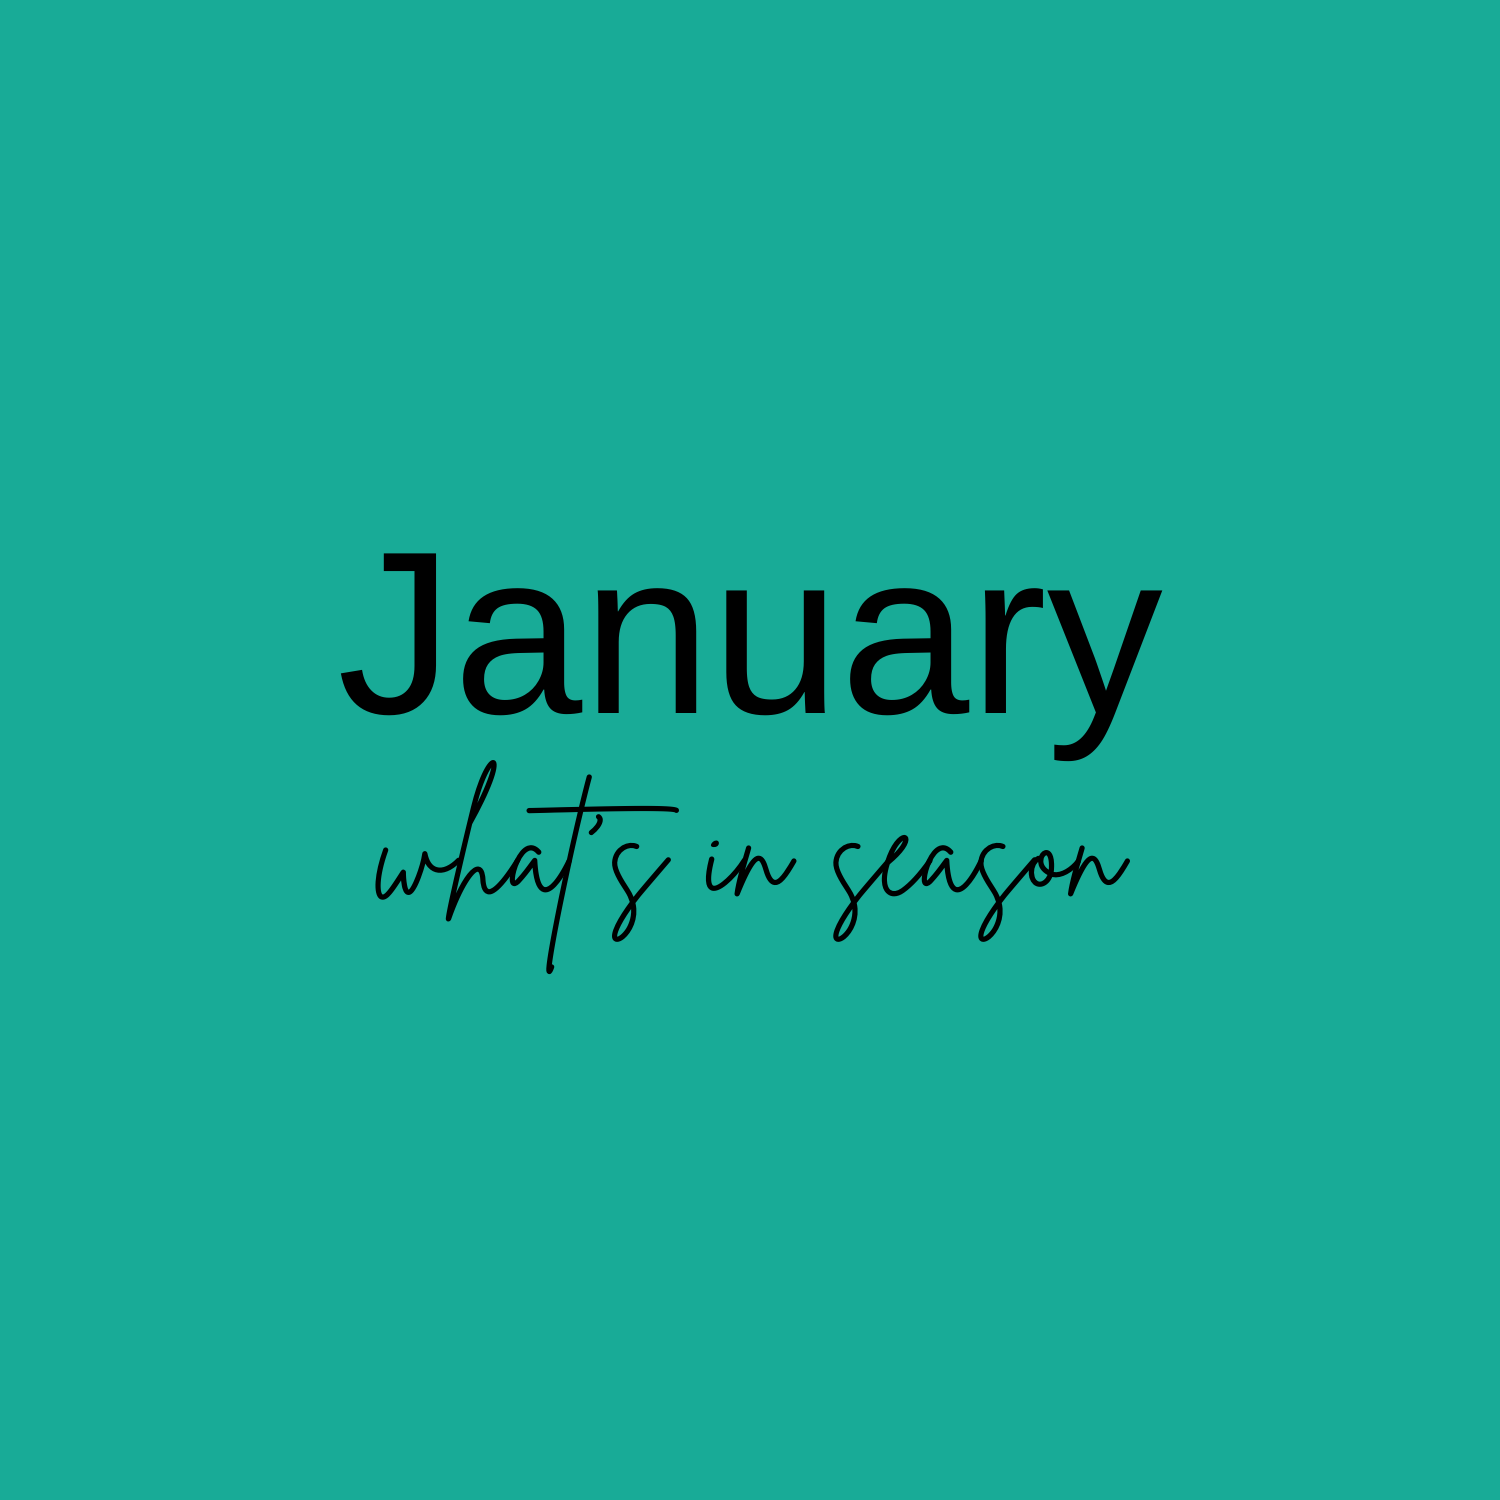 text "January - what's in season"